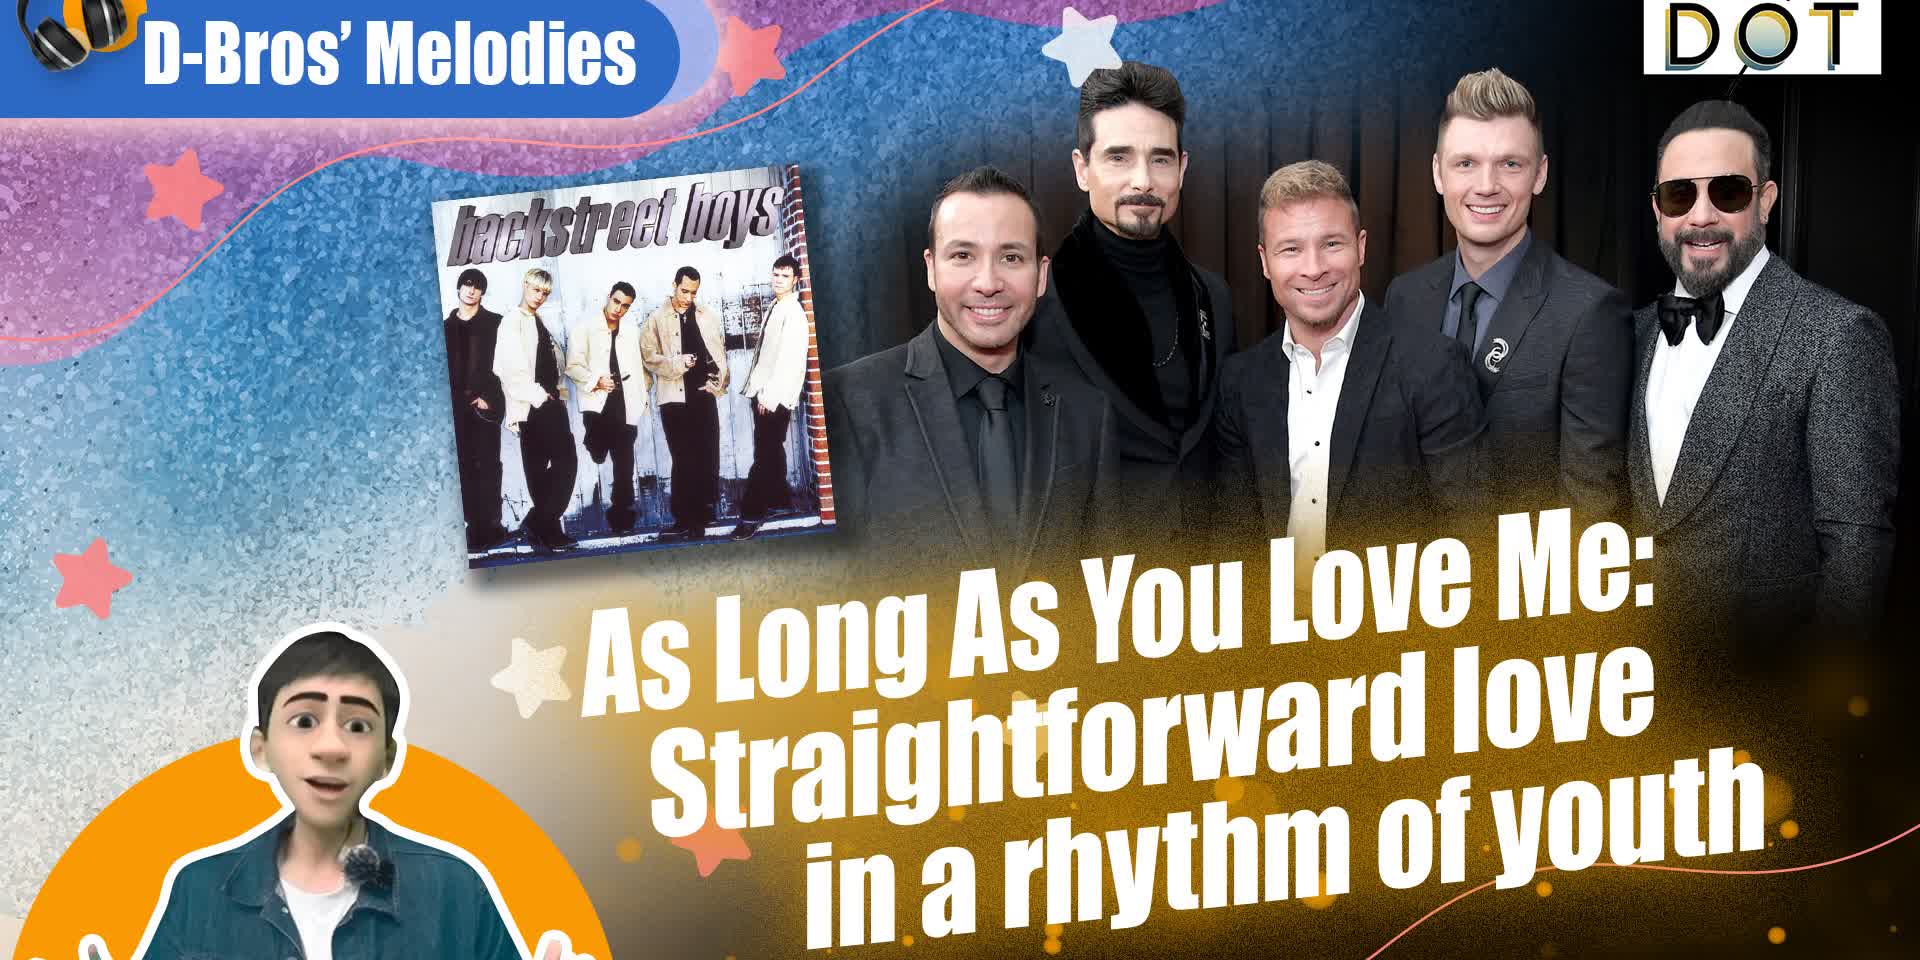 D-Bros’ Melodies | As Long As You Love Me: Straightforward love in a rhythm of youth